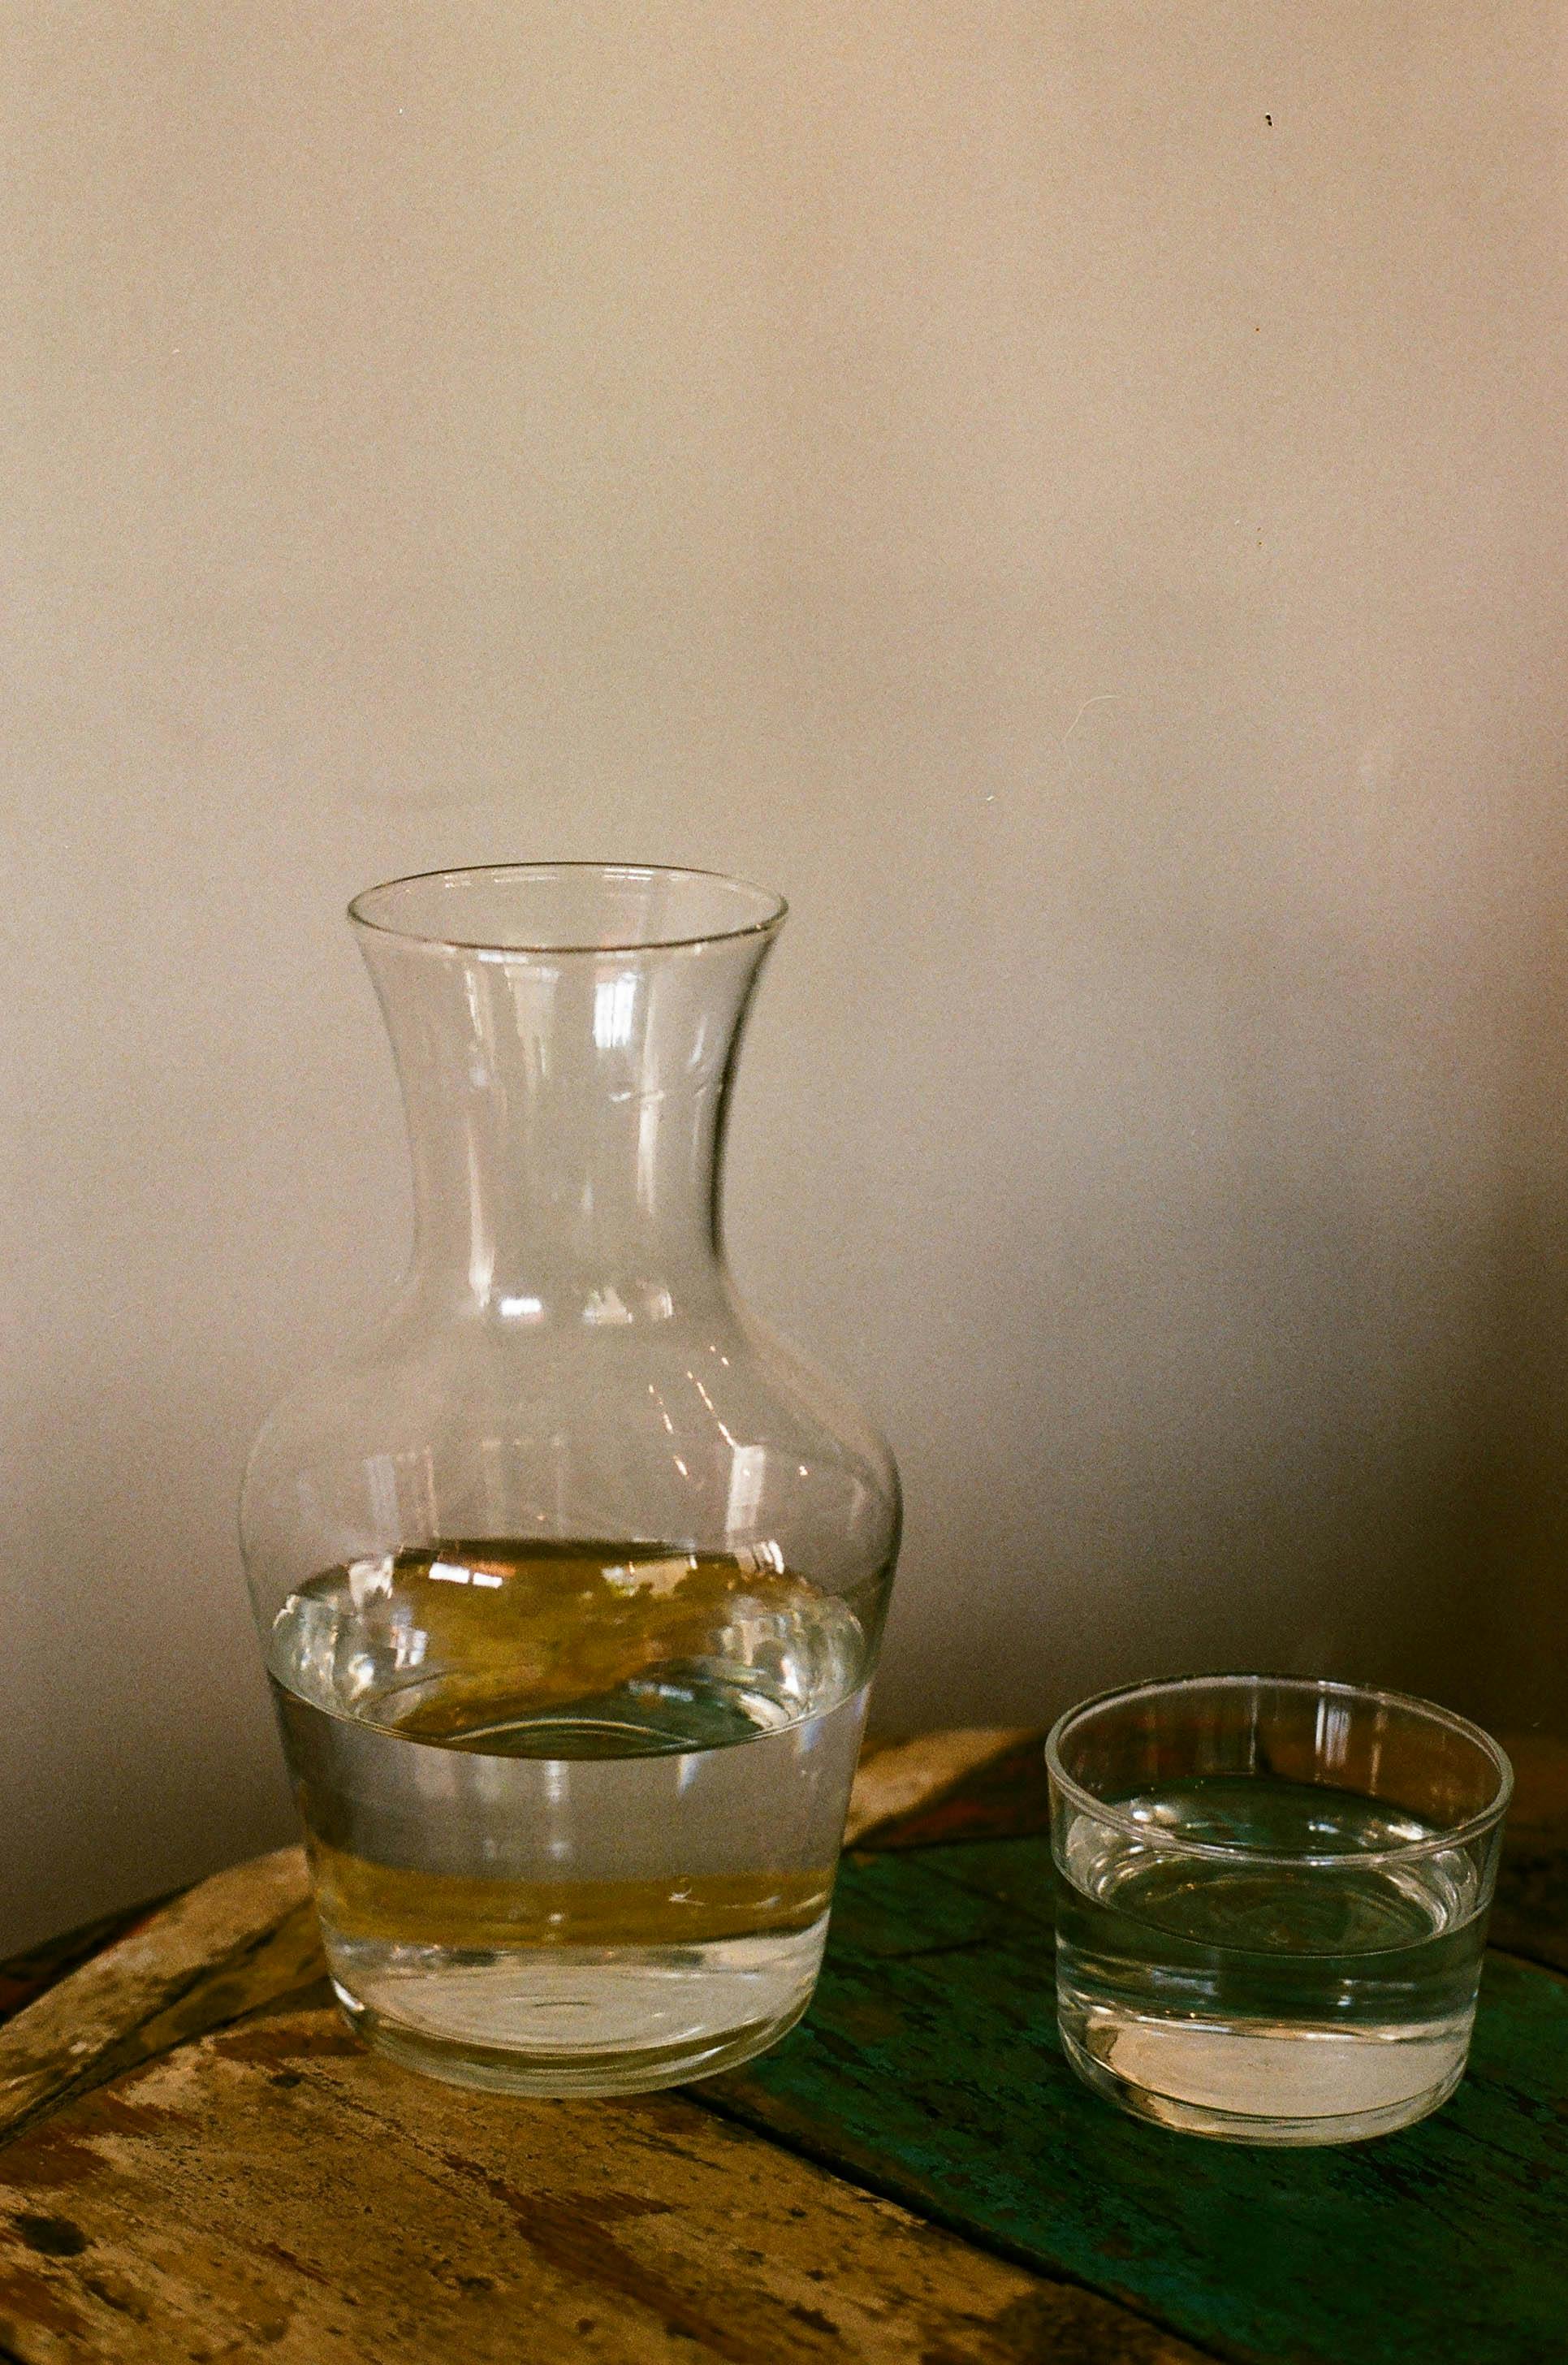 Clear Glass Pitcher With Water Beside A Glass \u00b7 Free Stock Photo